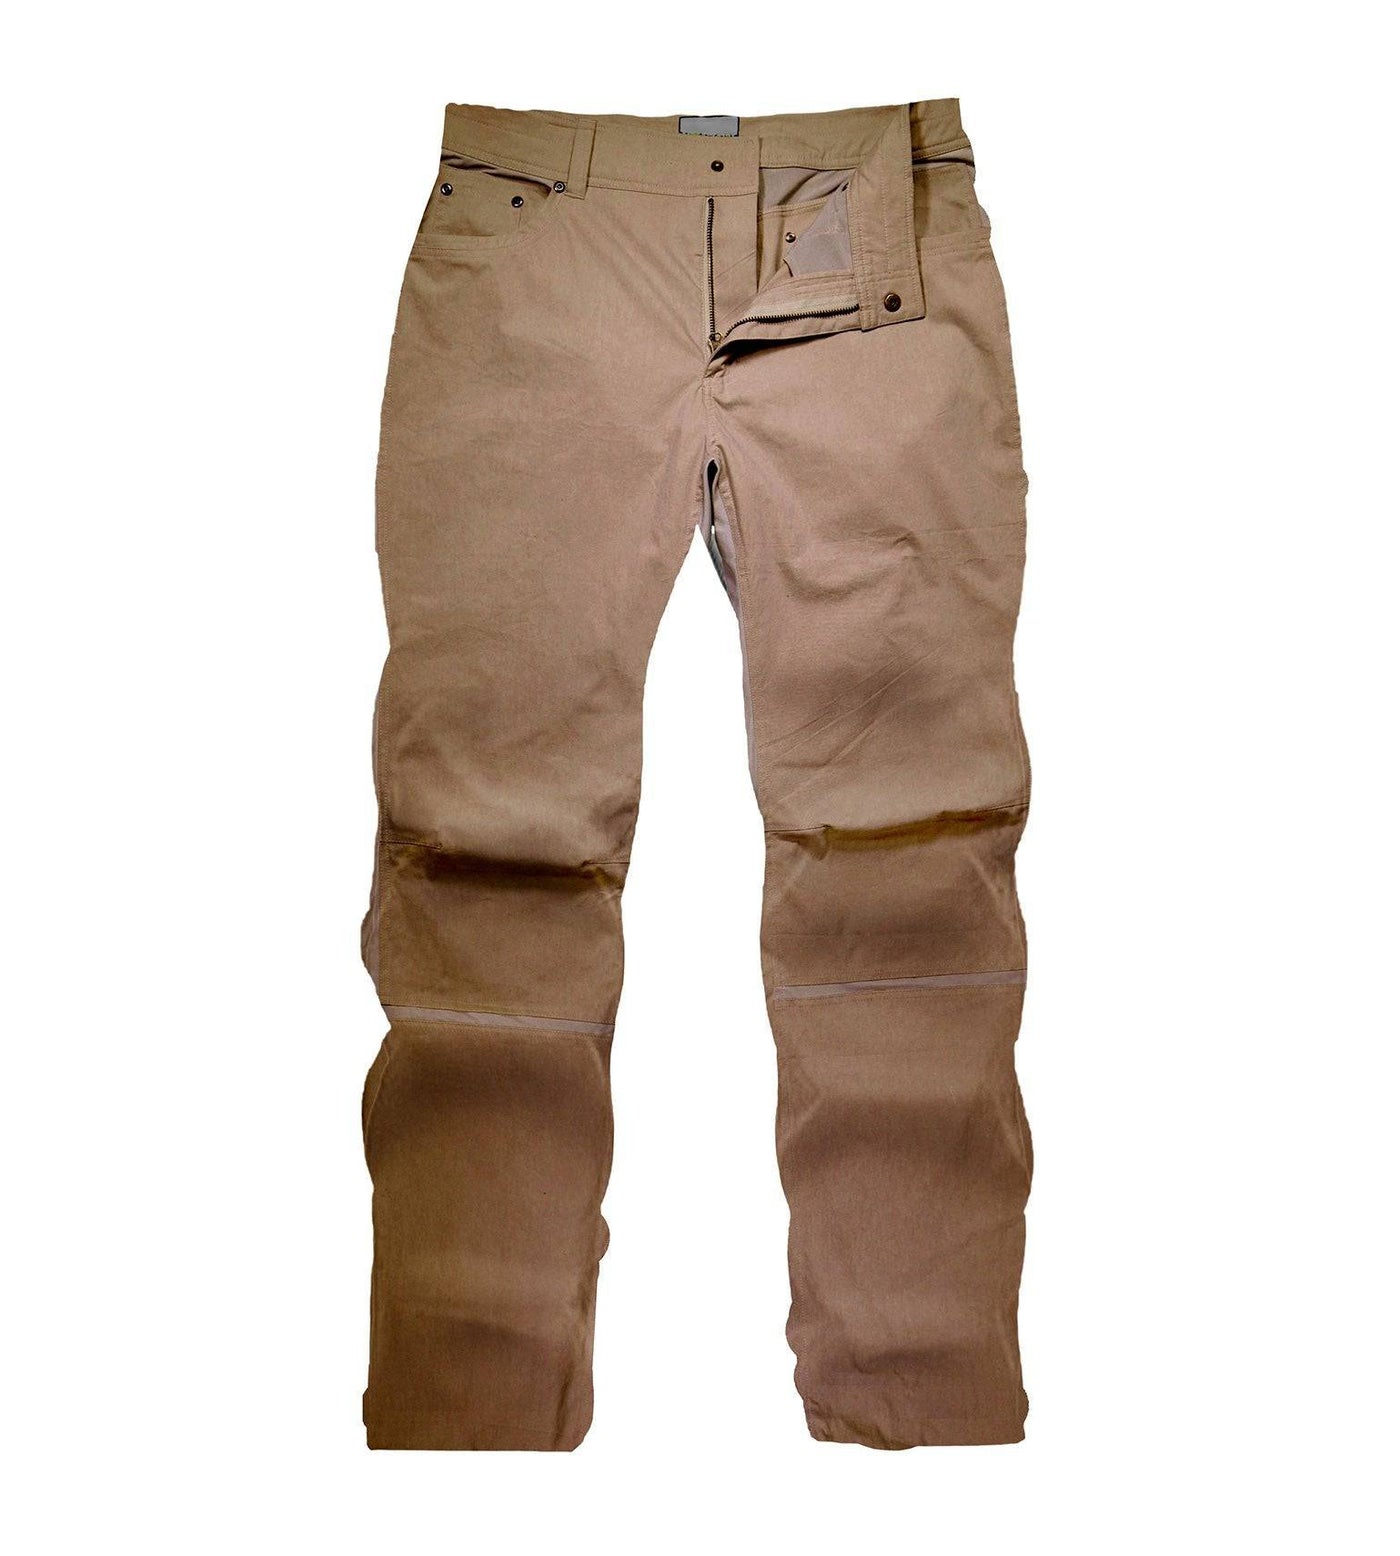 Escent Pants - Brown - Vycah